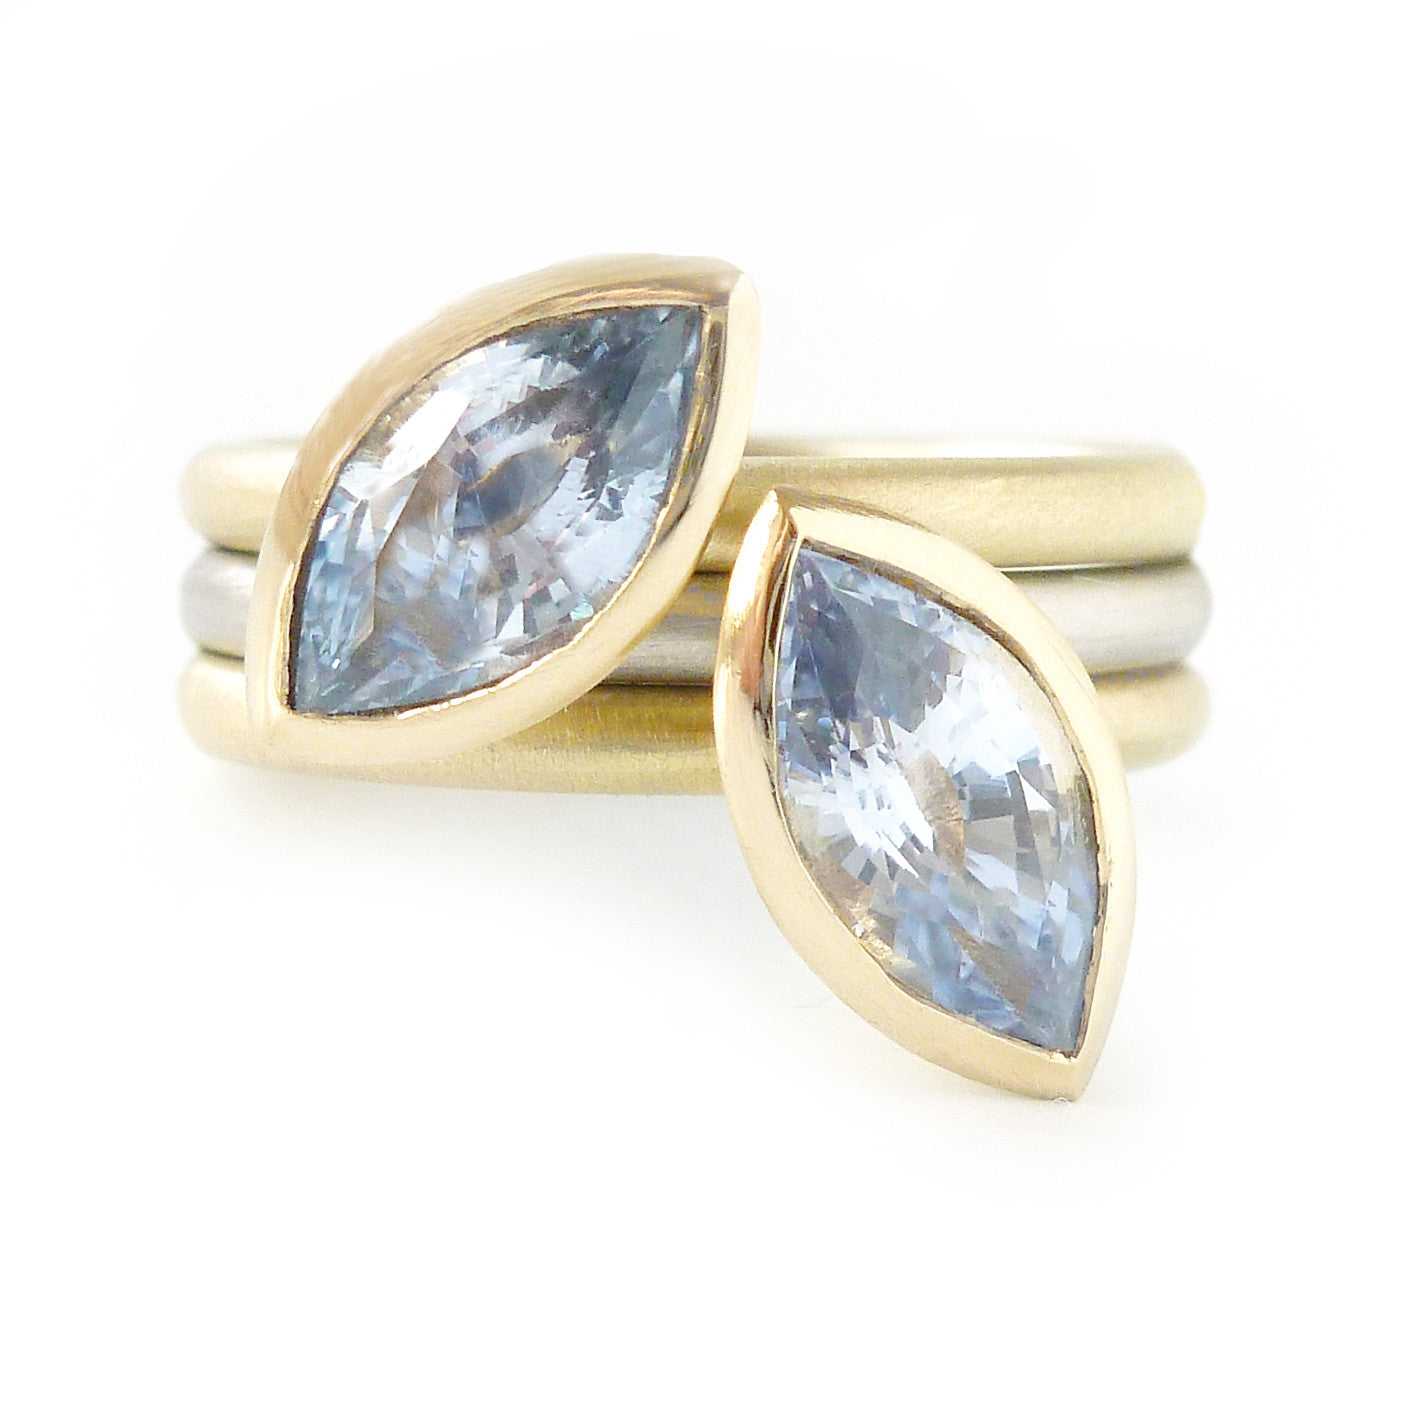 SOLD: 18k Gold and Sapphire Ring Set (OF34) - Sue Lane Contemporary Jewellery - 1